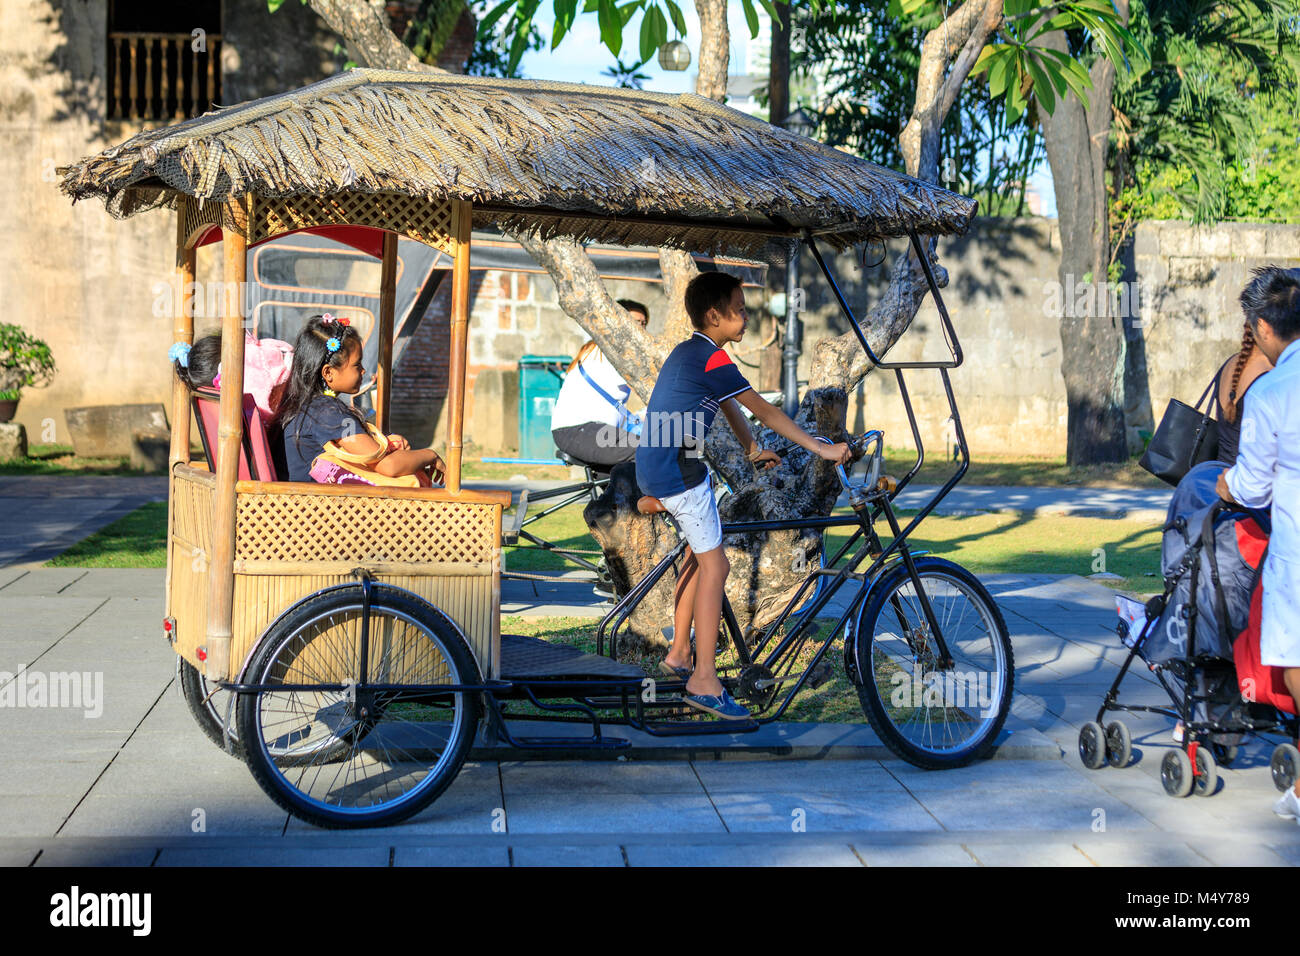 Manila, Philippines - Feb 17, 2018 : Tourists ride on Philippines traditional tricycle at Fort Santiago garden in Intramuros district Stock Photo